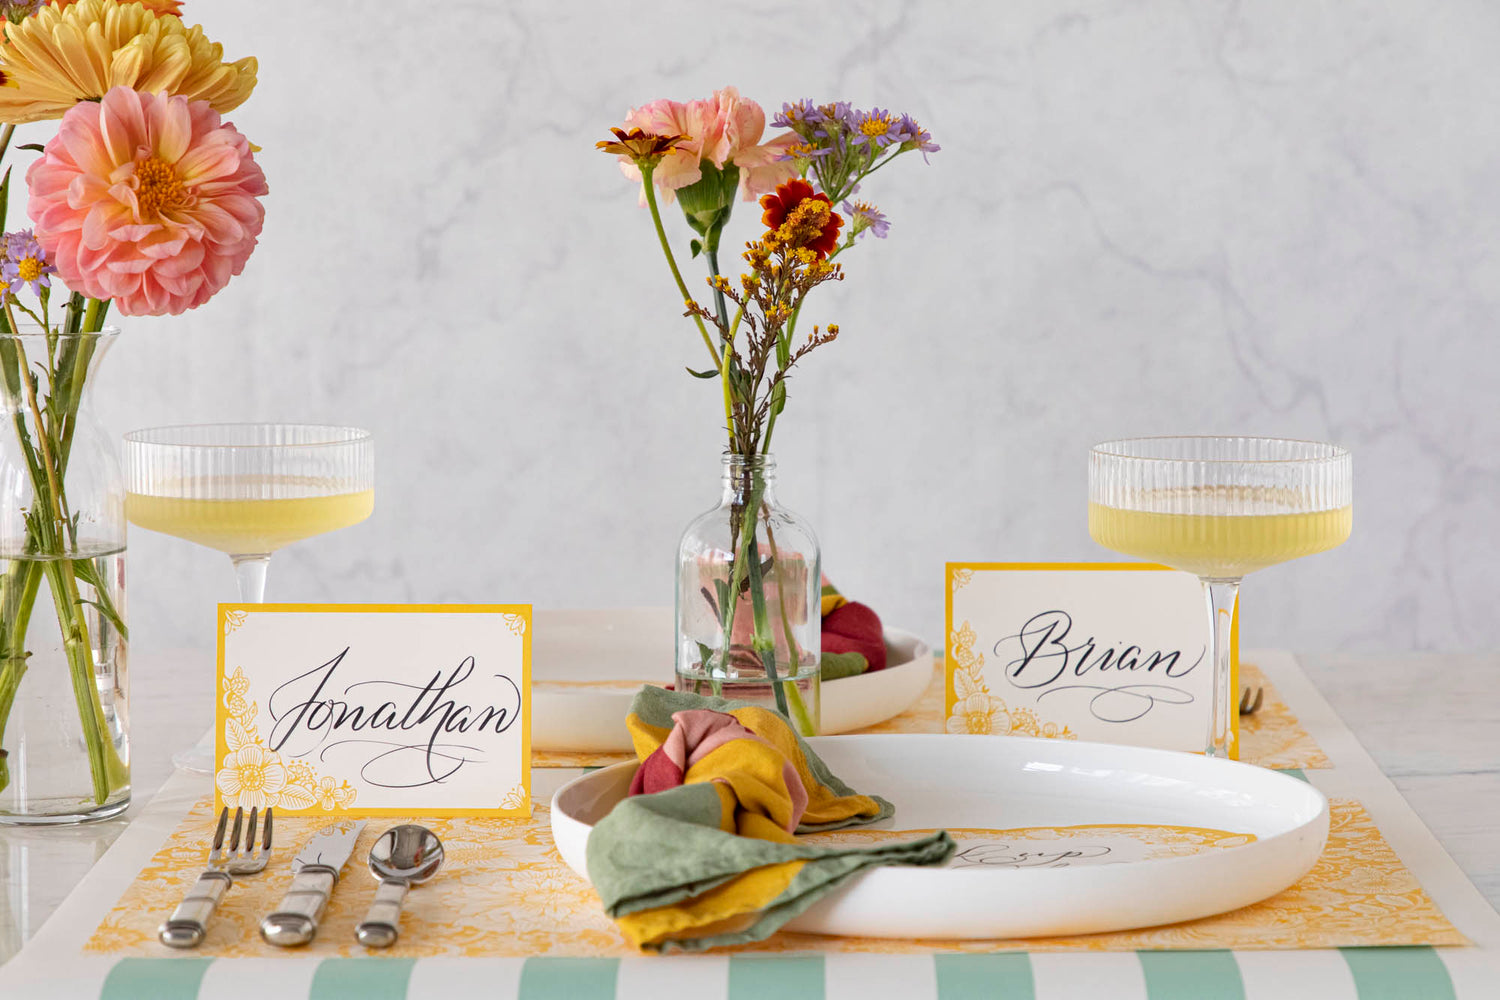 A Spring Blooms Place Card from Hester &amp; Cook with hand-painted florals in vibrant color.